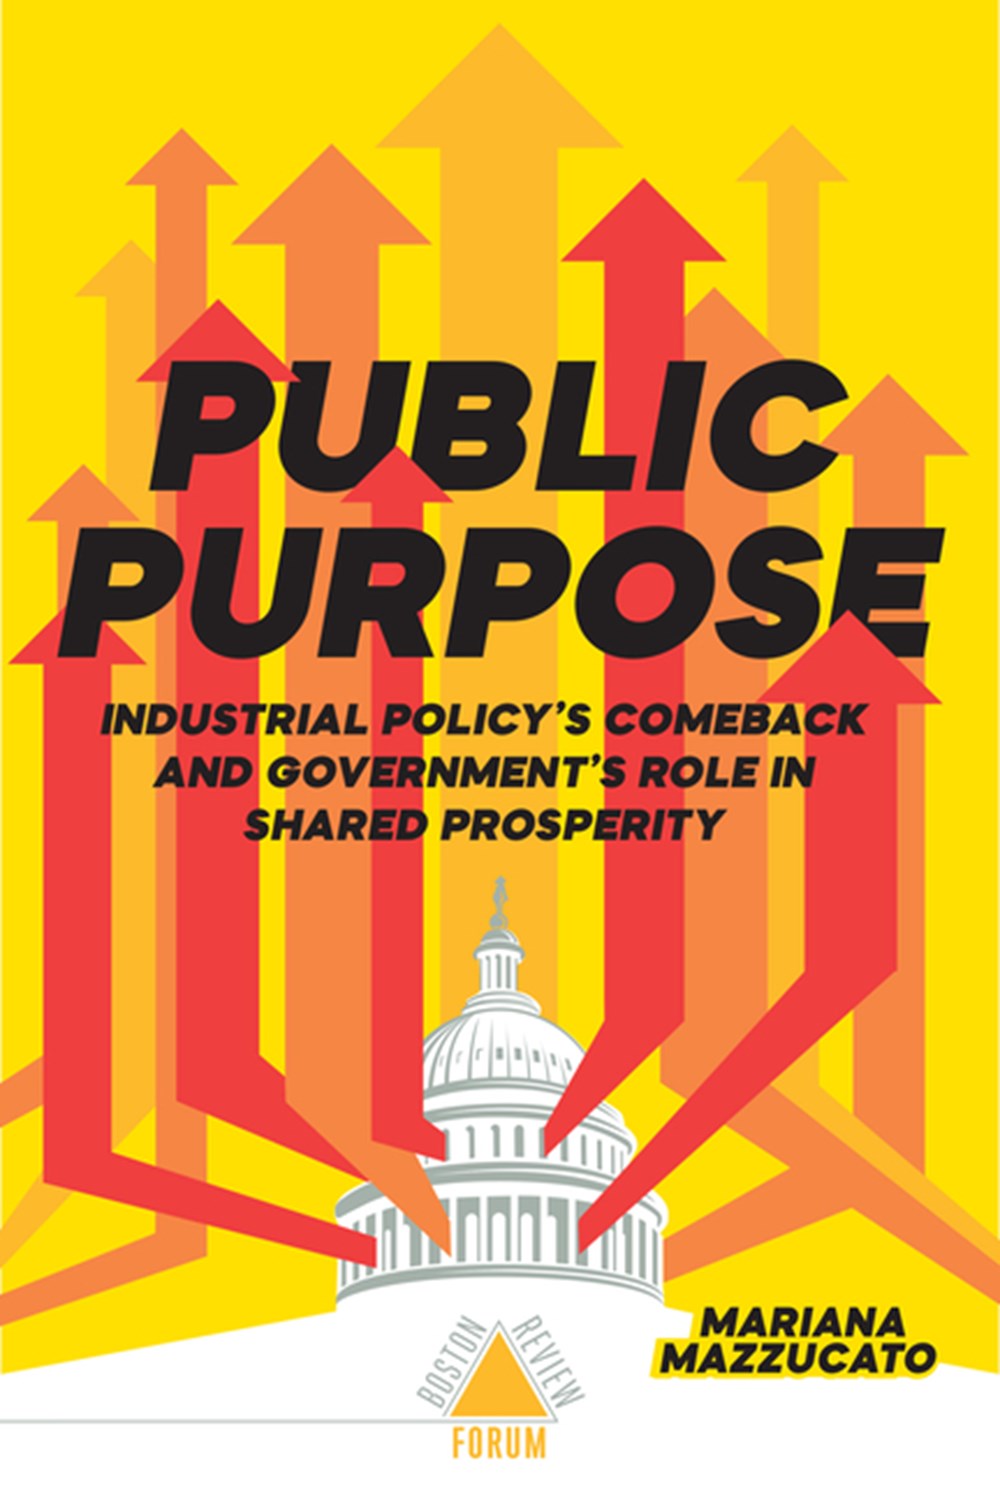 Public Purpose Industrial Policy's Comeback and Government's Role in Shared Prosperity